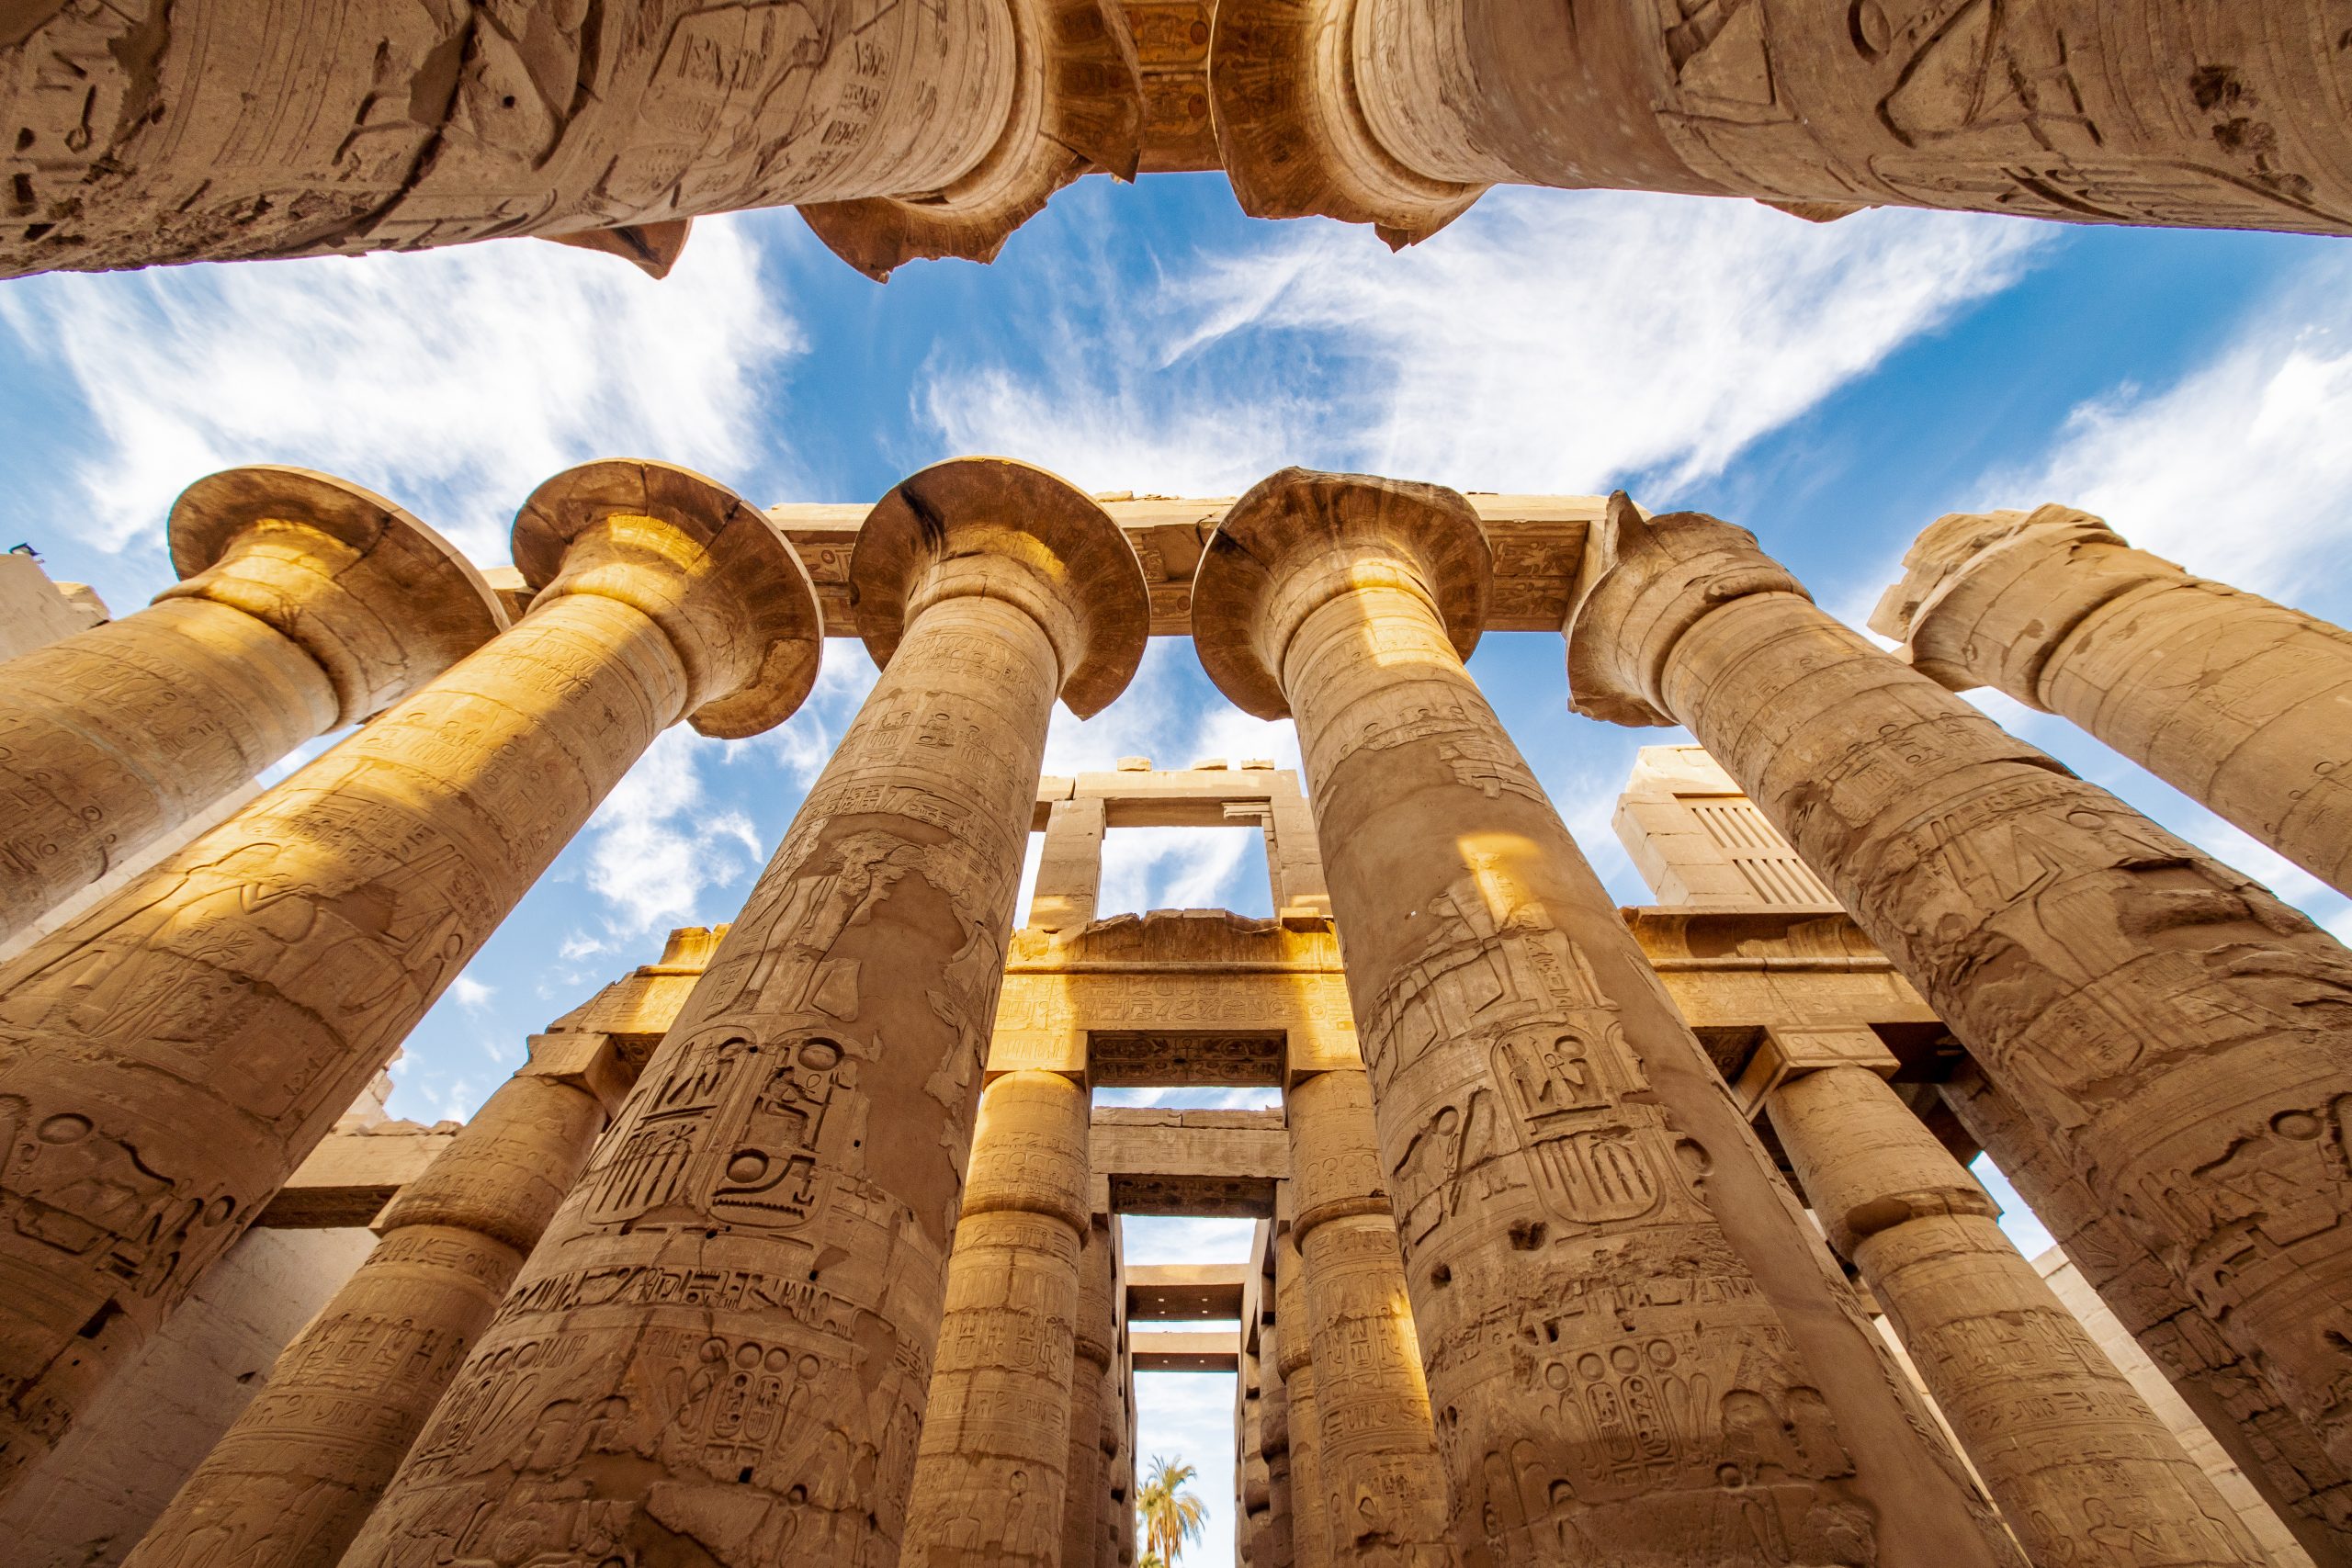 The great columns at the Karnak Temple in Luxor Thebes Egypt